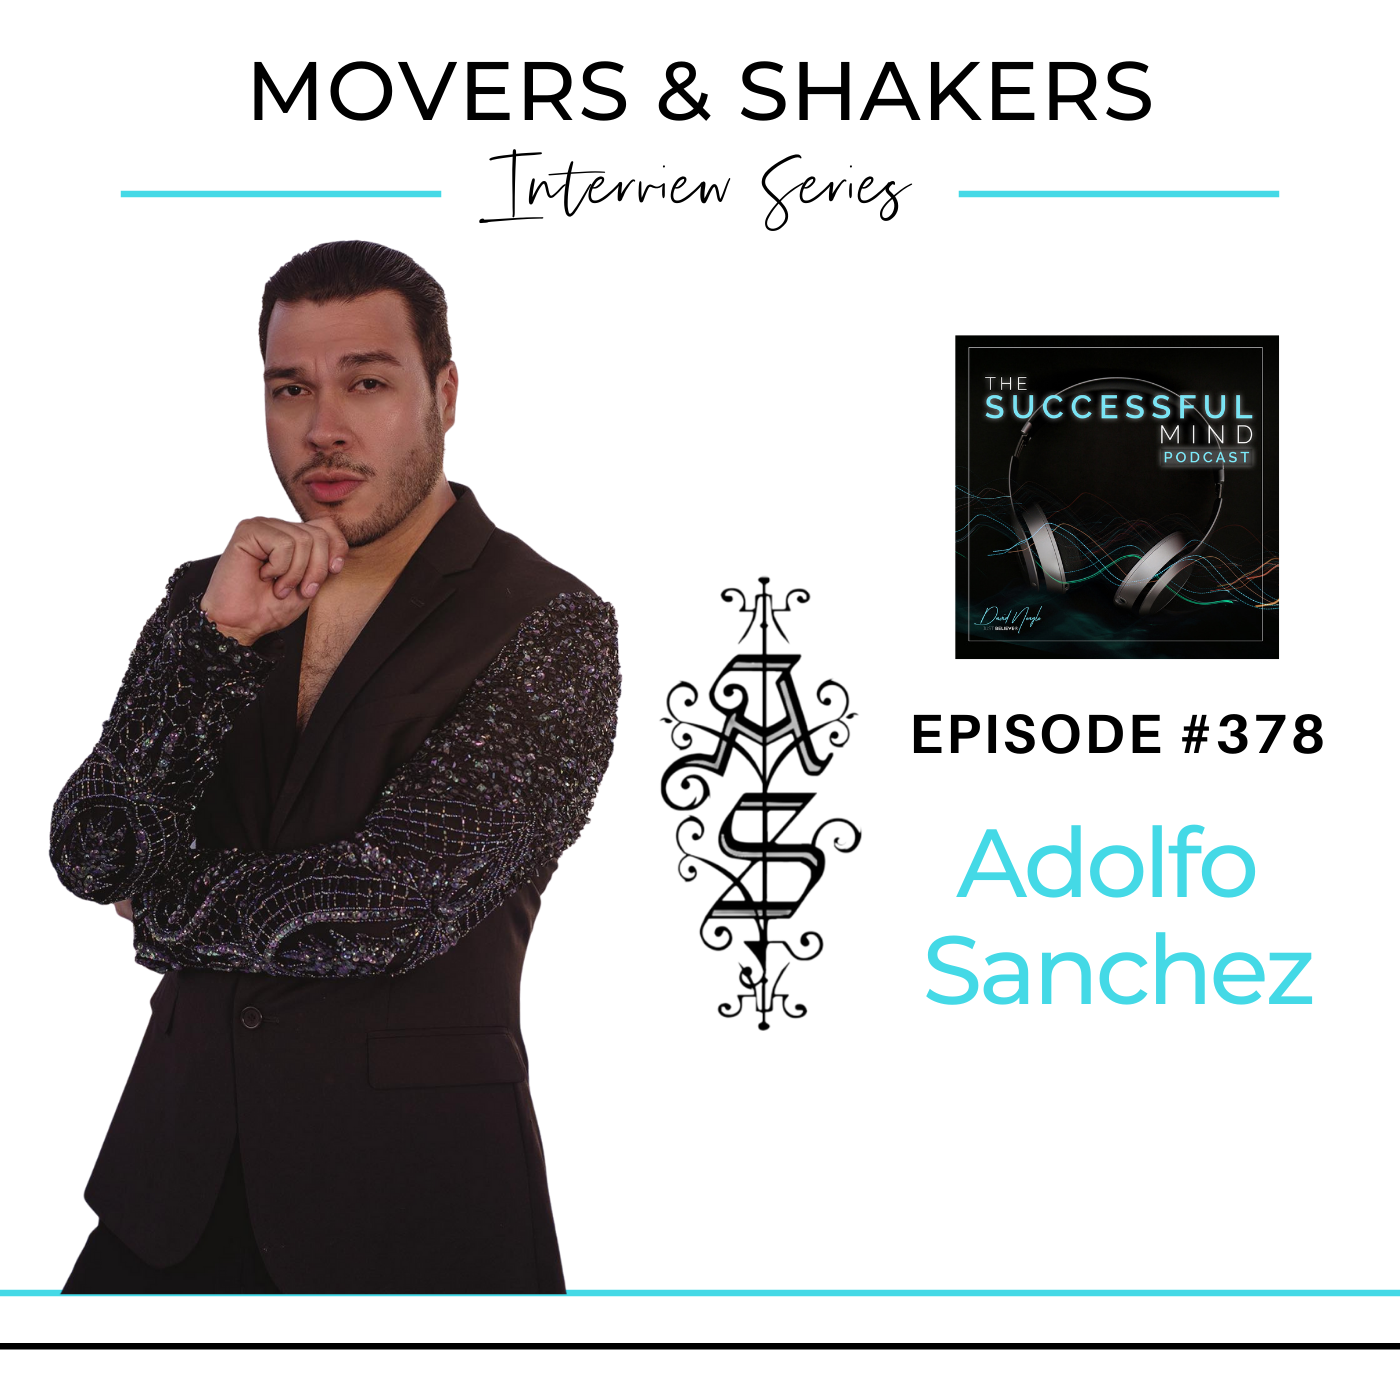 The Successful Mind Podcast - Movers & Shakers - Adolfo Sanchez